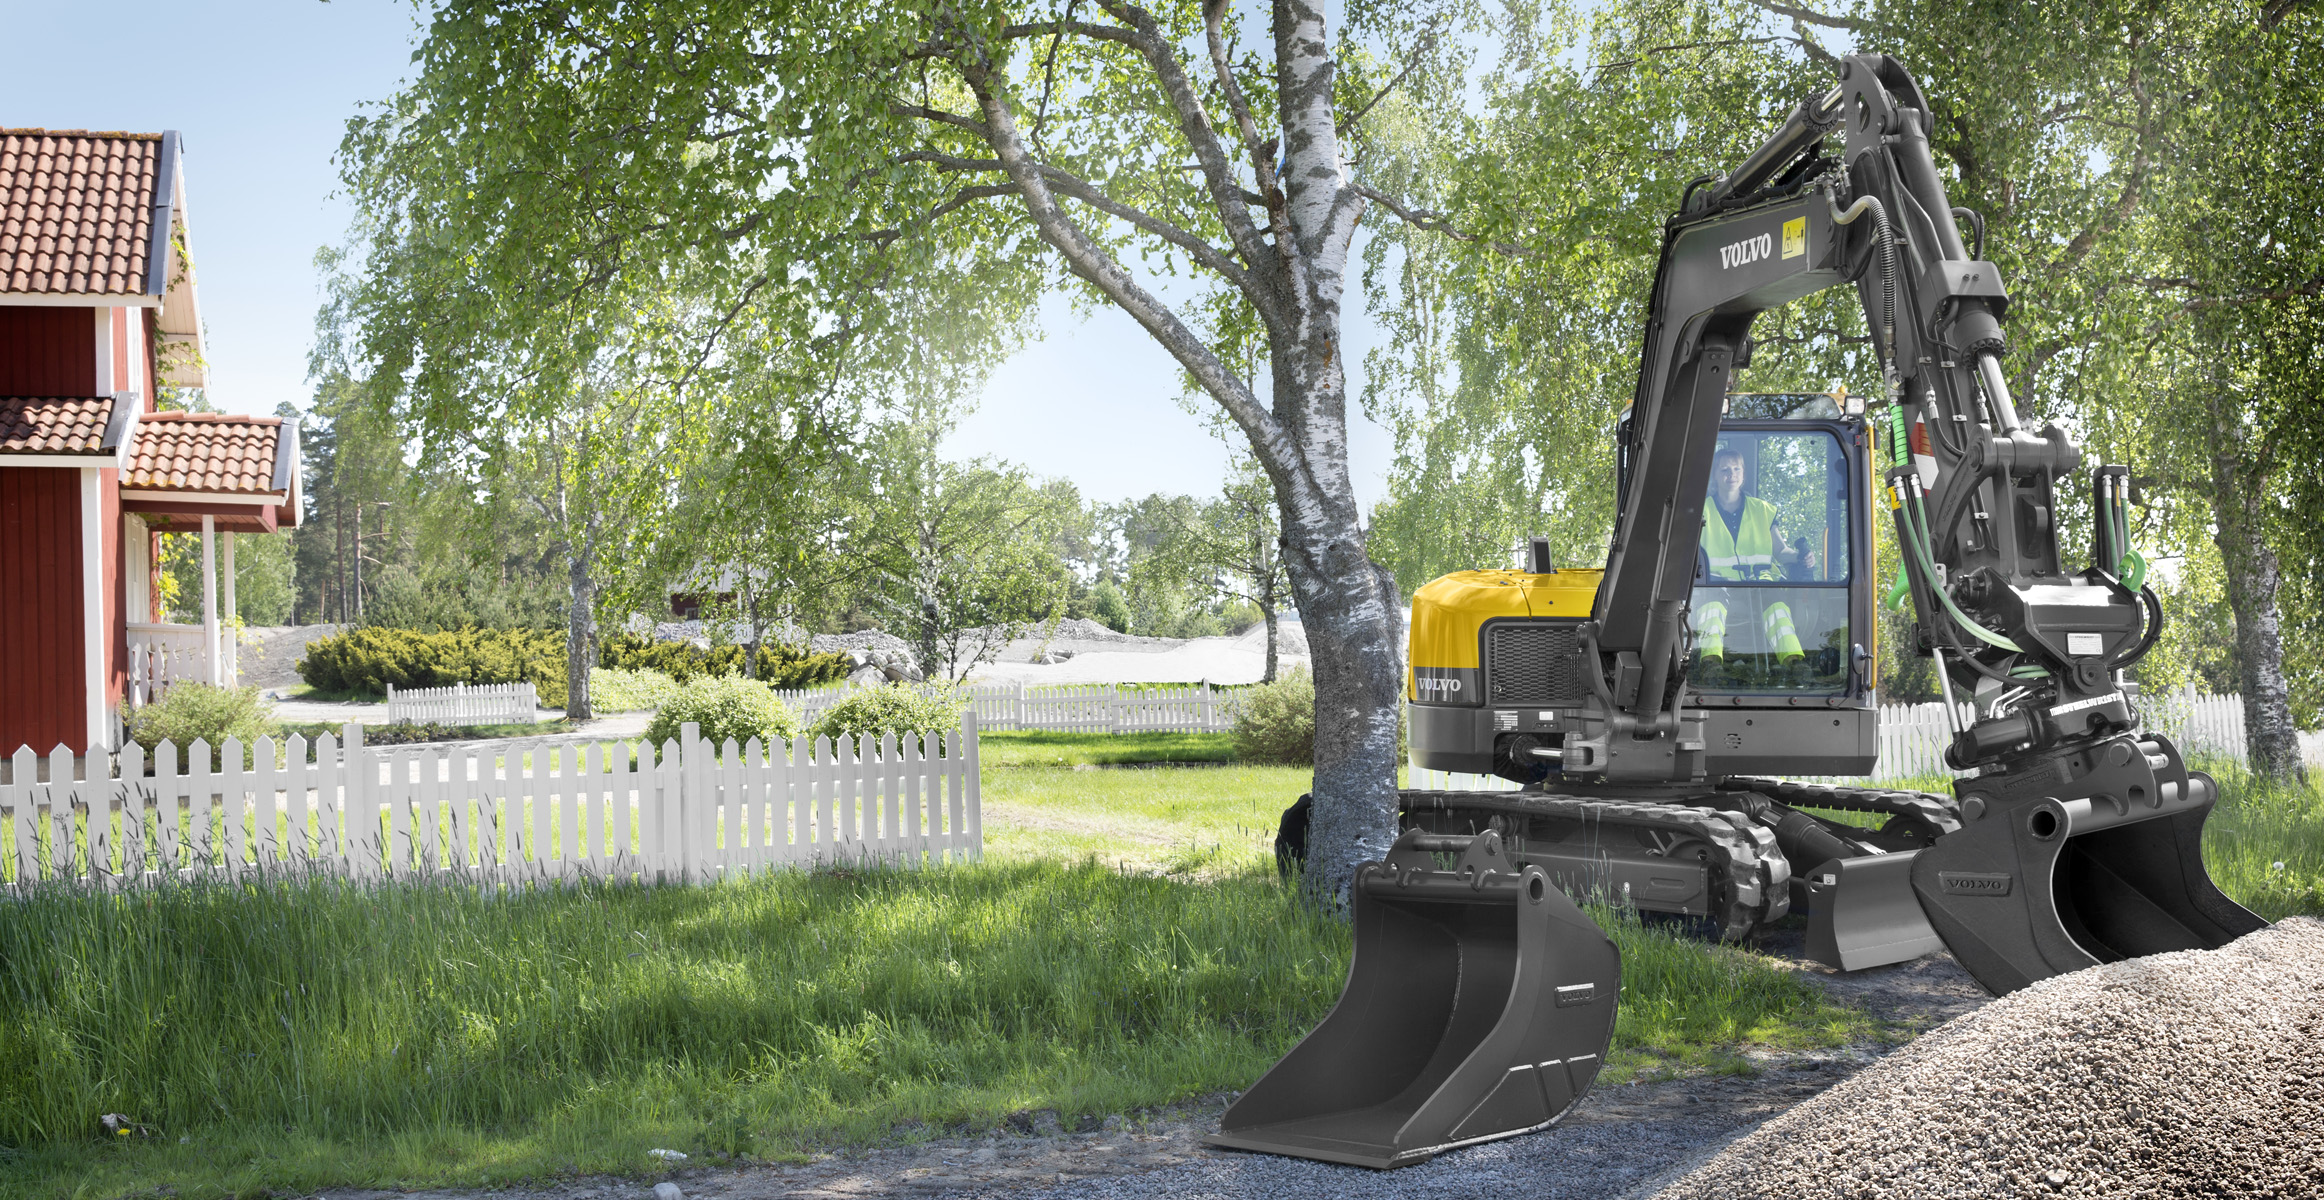 How To Select The Right Excavator Bucket For Your Application